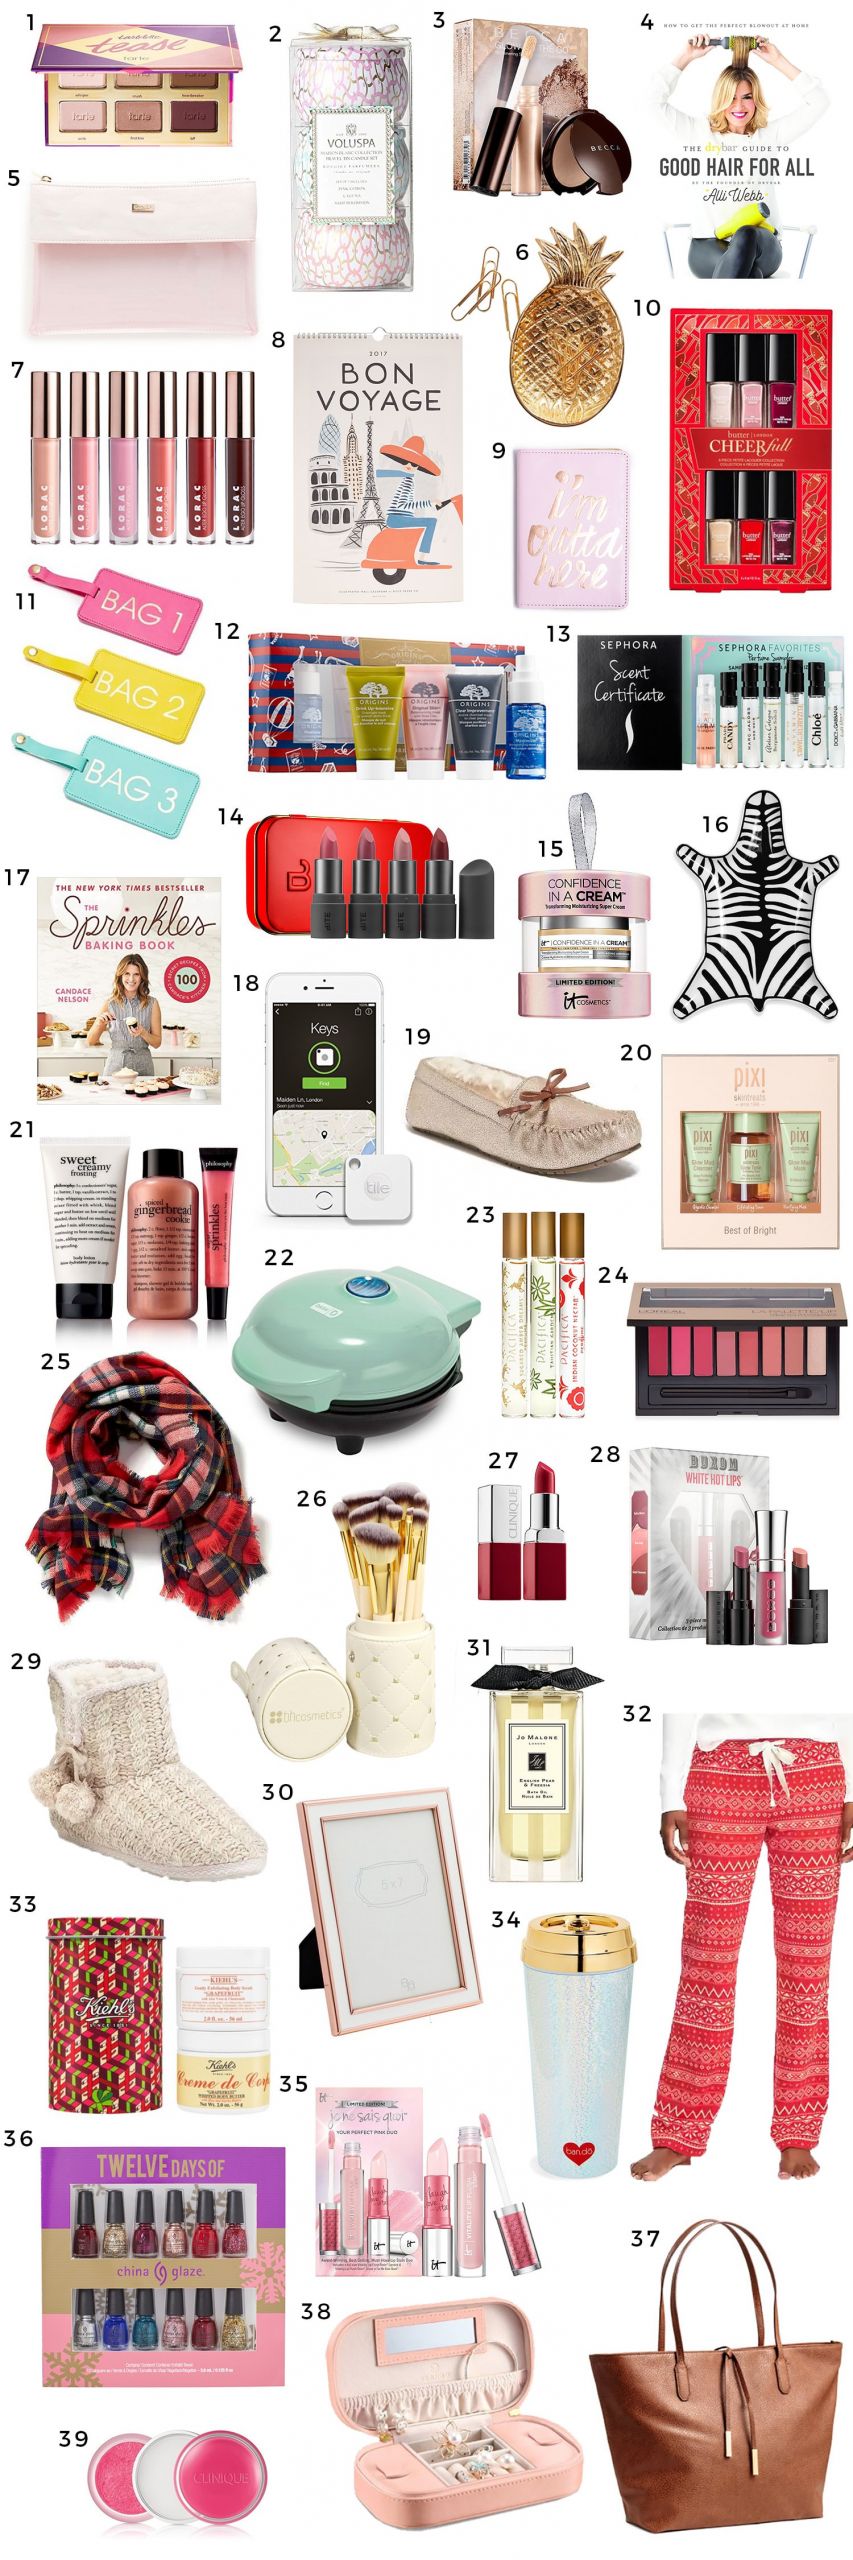 Top Christmas Gift Ideas
 The Best Christmas Gift Ideas for Women under $25